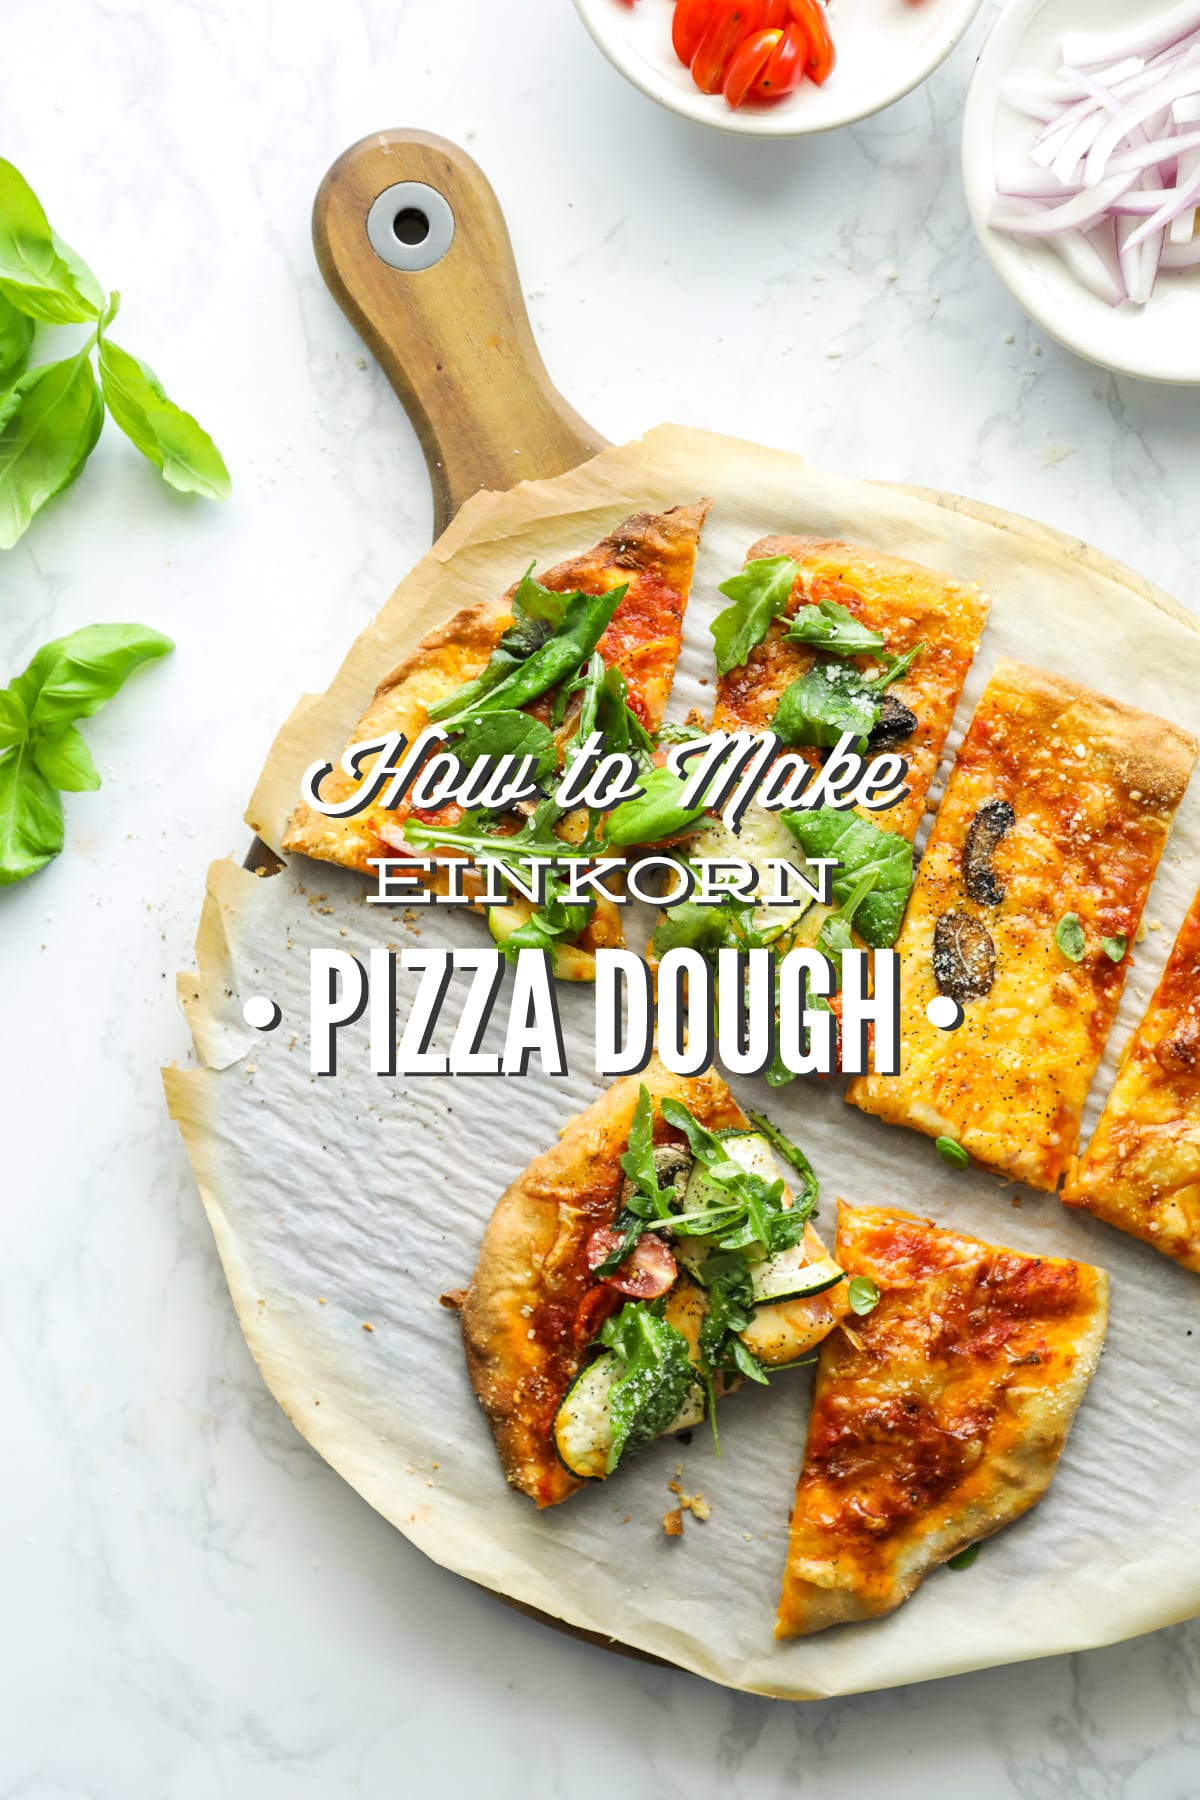 How to Make Homemade Einkorn Pizza Dough (Oven or Grill)